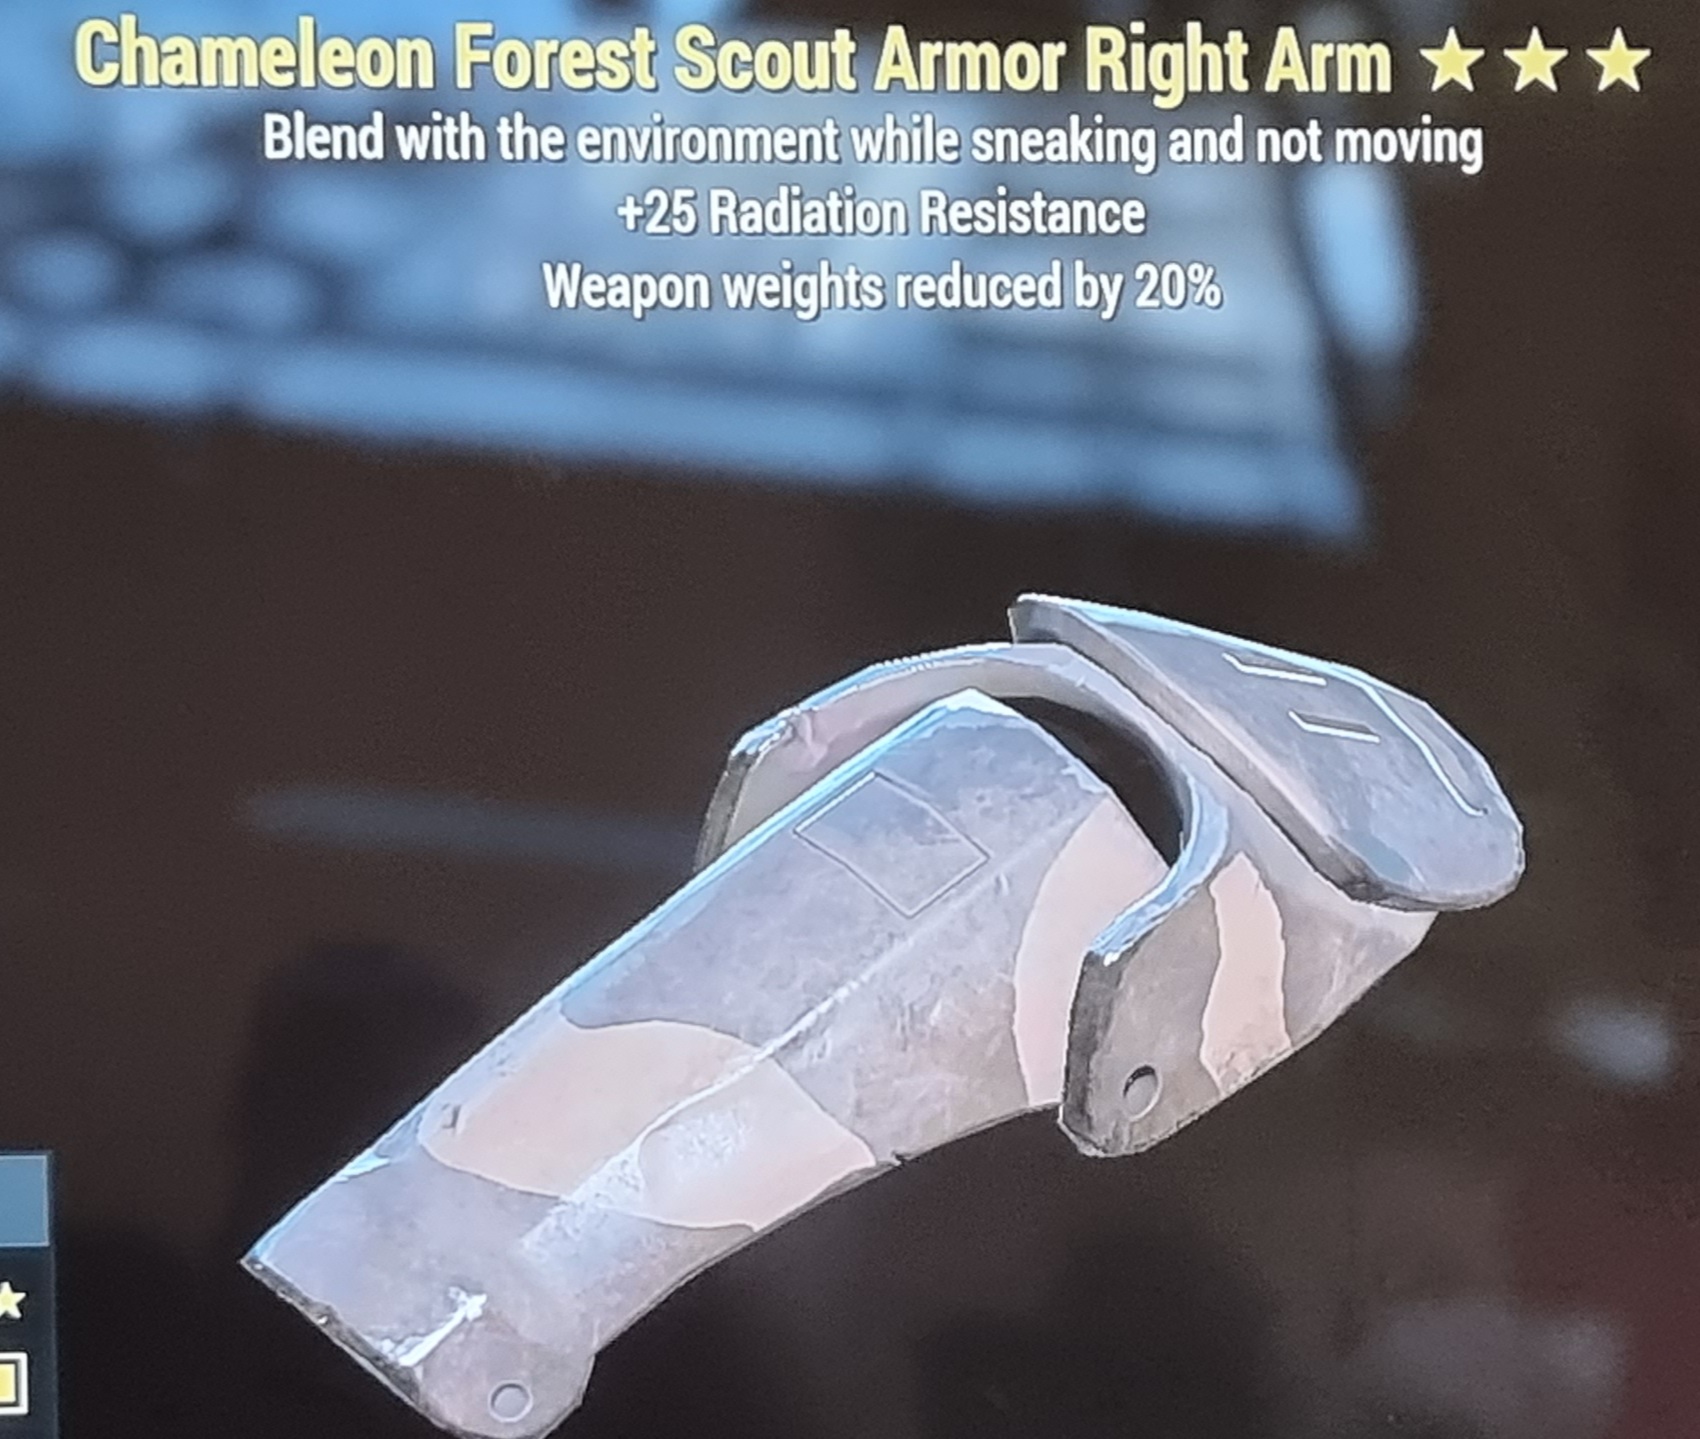 Chameleon weapon Weight reduction Rad resist forest right arm FALLOUT 76 PS4